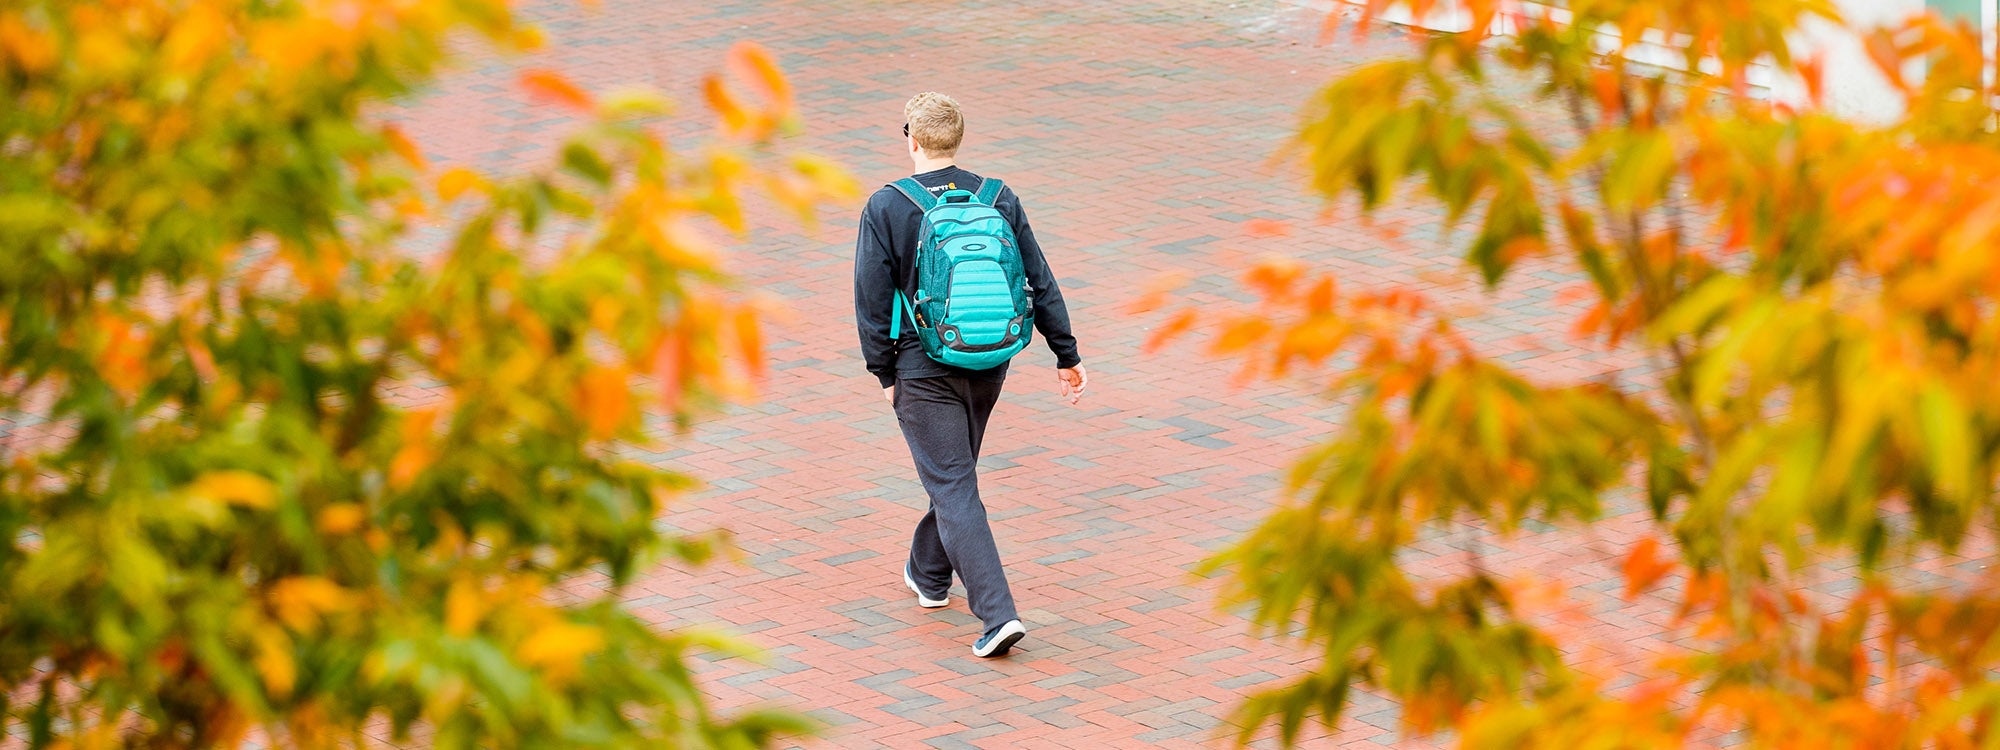 Leaves starting to change color in the crisp fall air frame an ECU student as he makes his way to class near the Sci Tech Building on Tuesday, October, 31, 2017.  (ECU Photo by Rhett Butler)